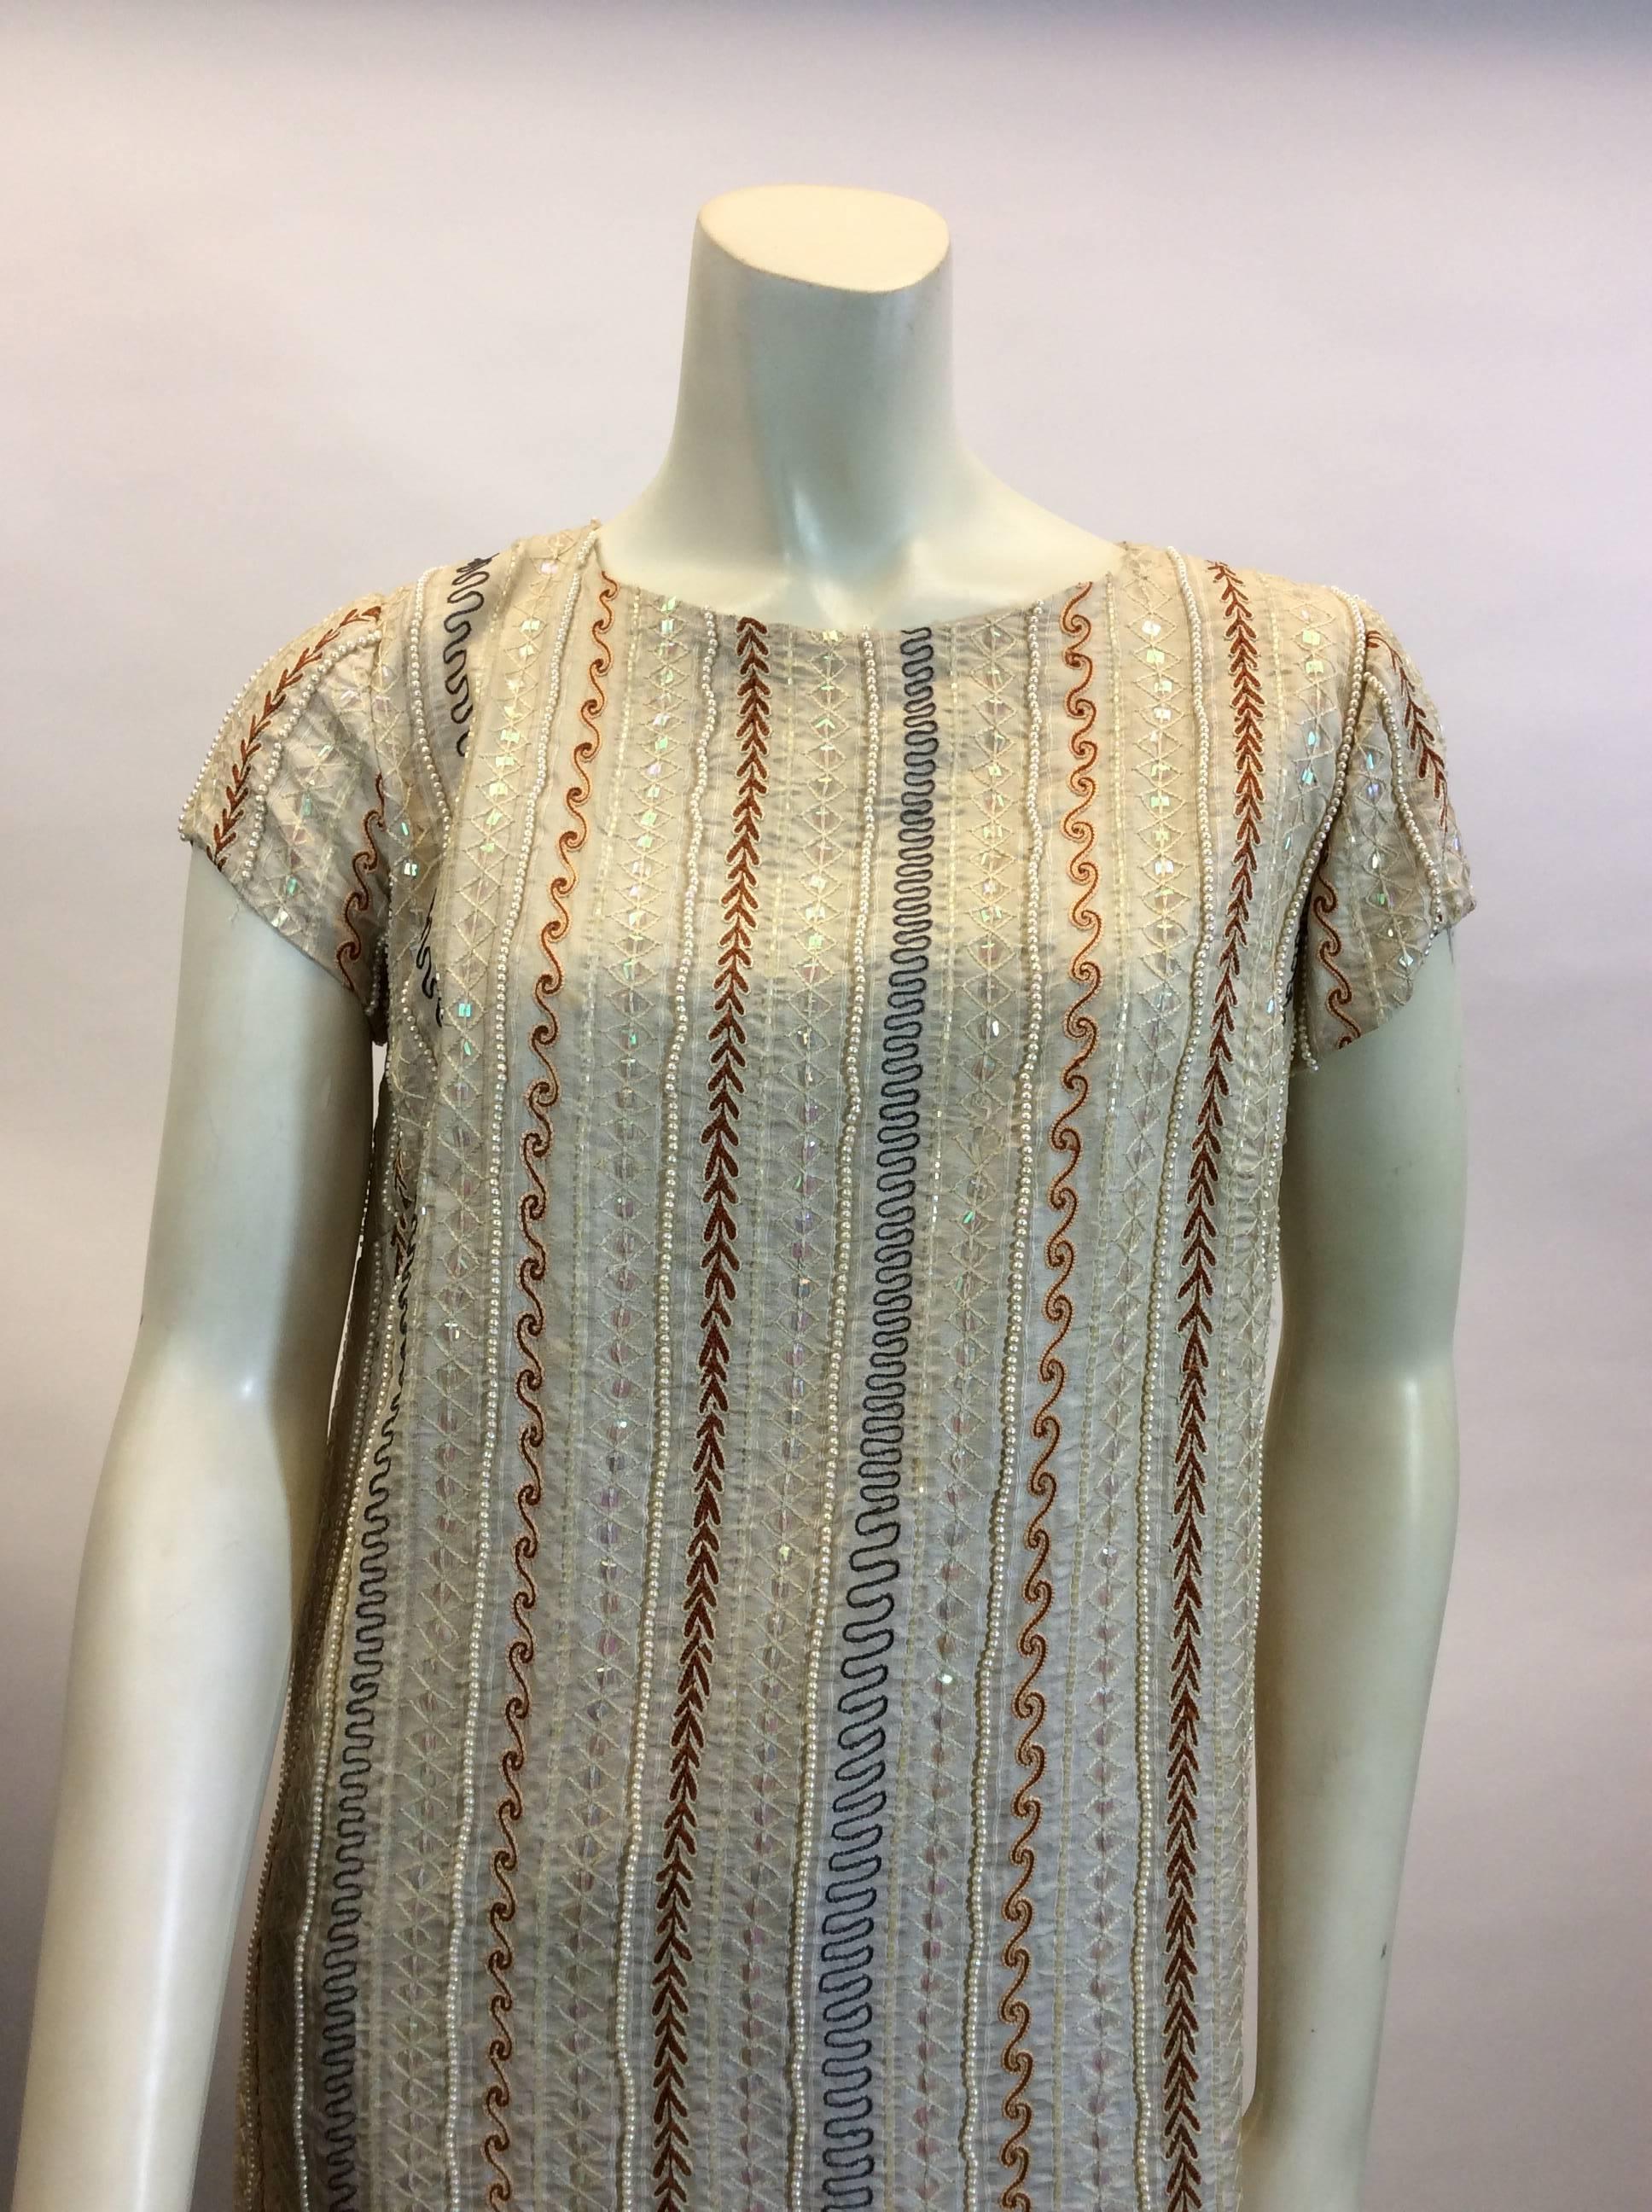 Vintage Beaded Tunic 
Couture Silva
Cream exterior and lined
A slit on either side of tunic
